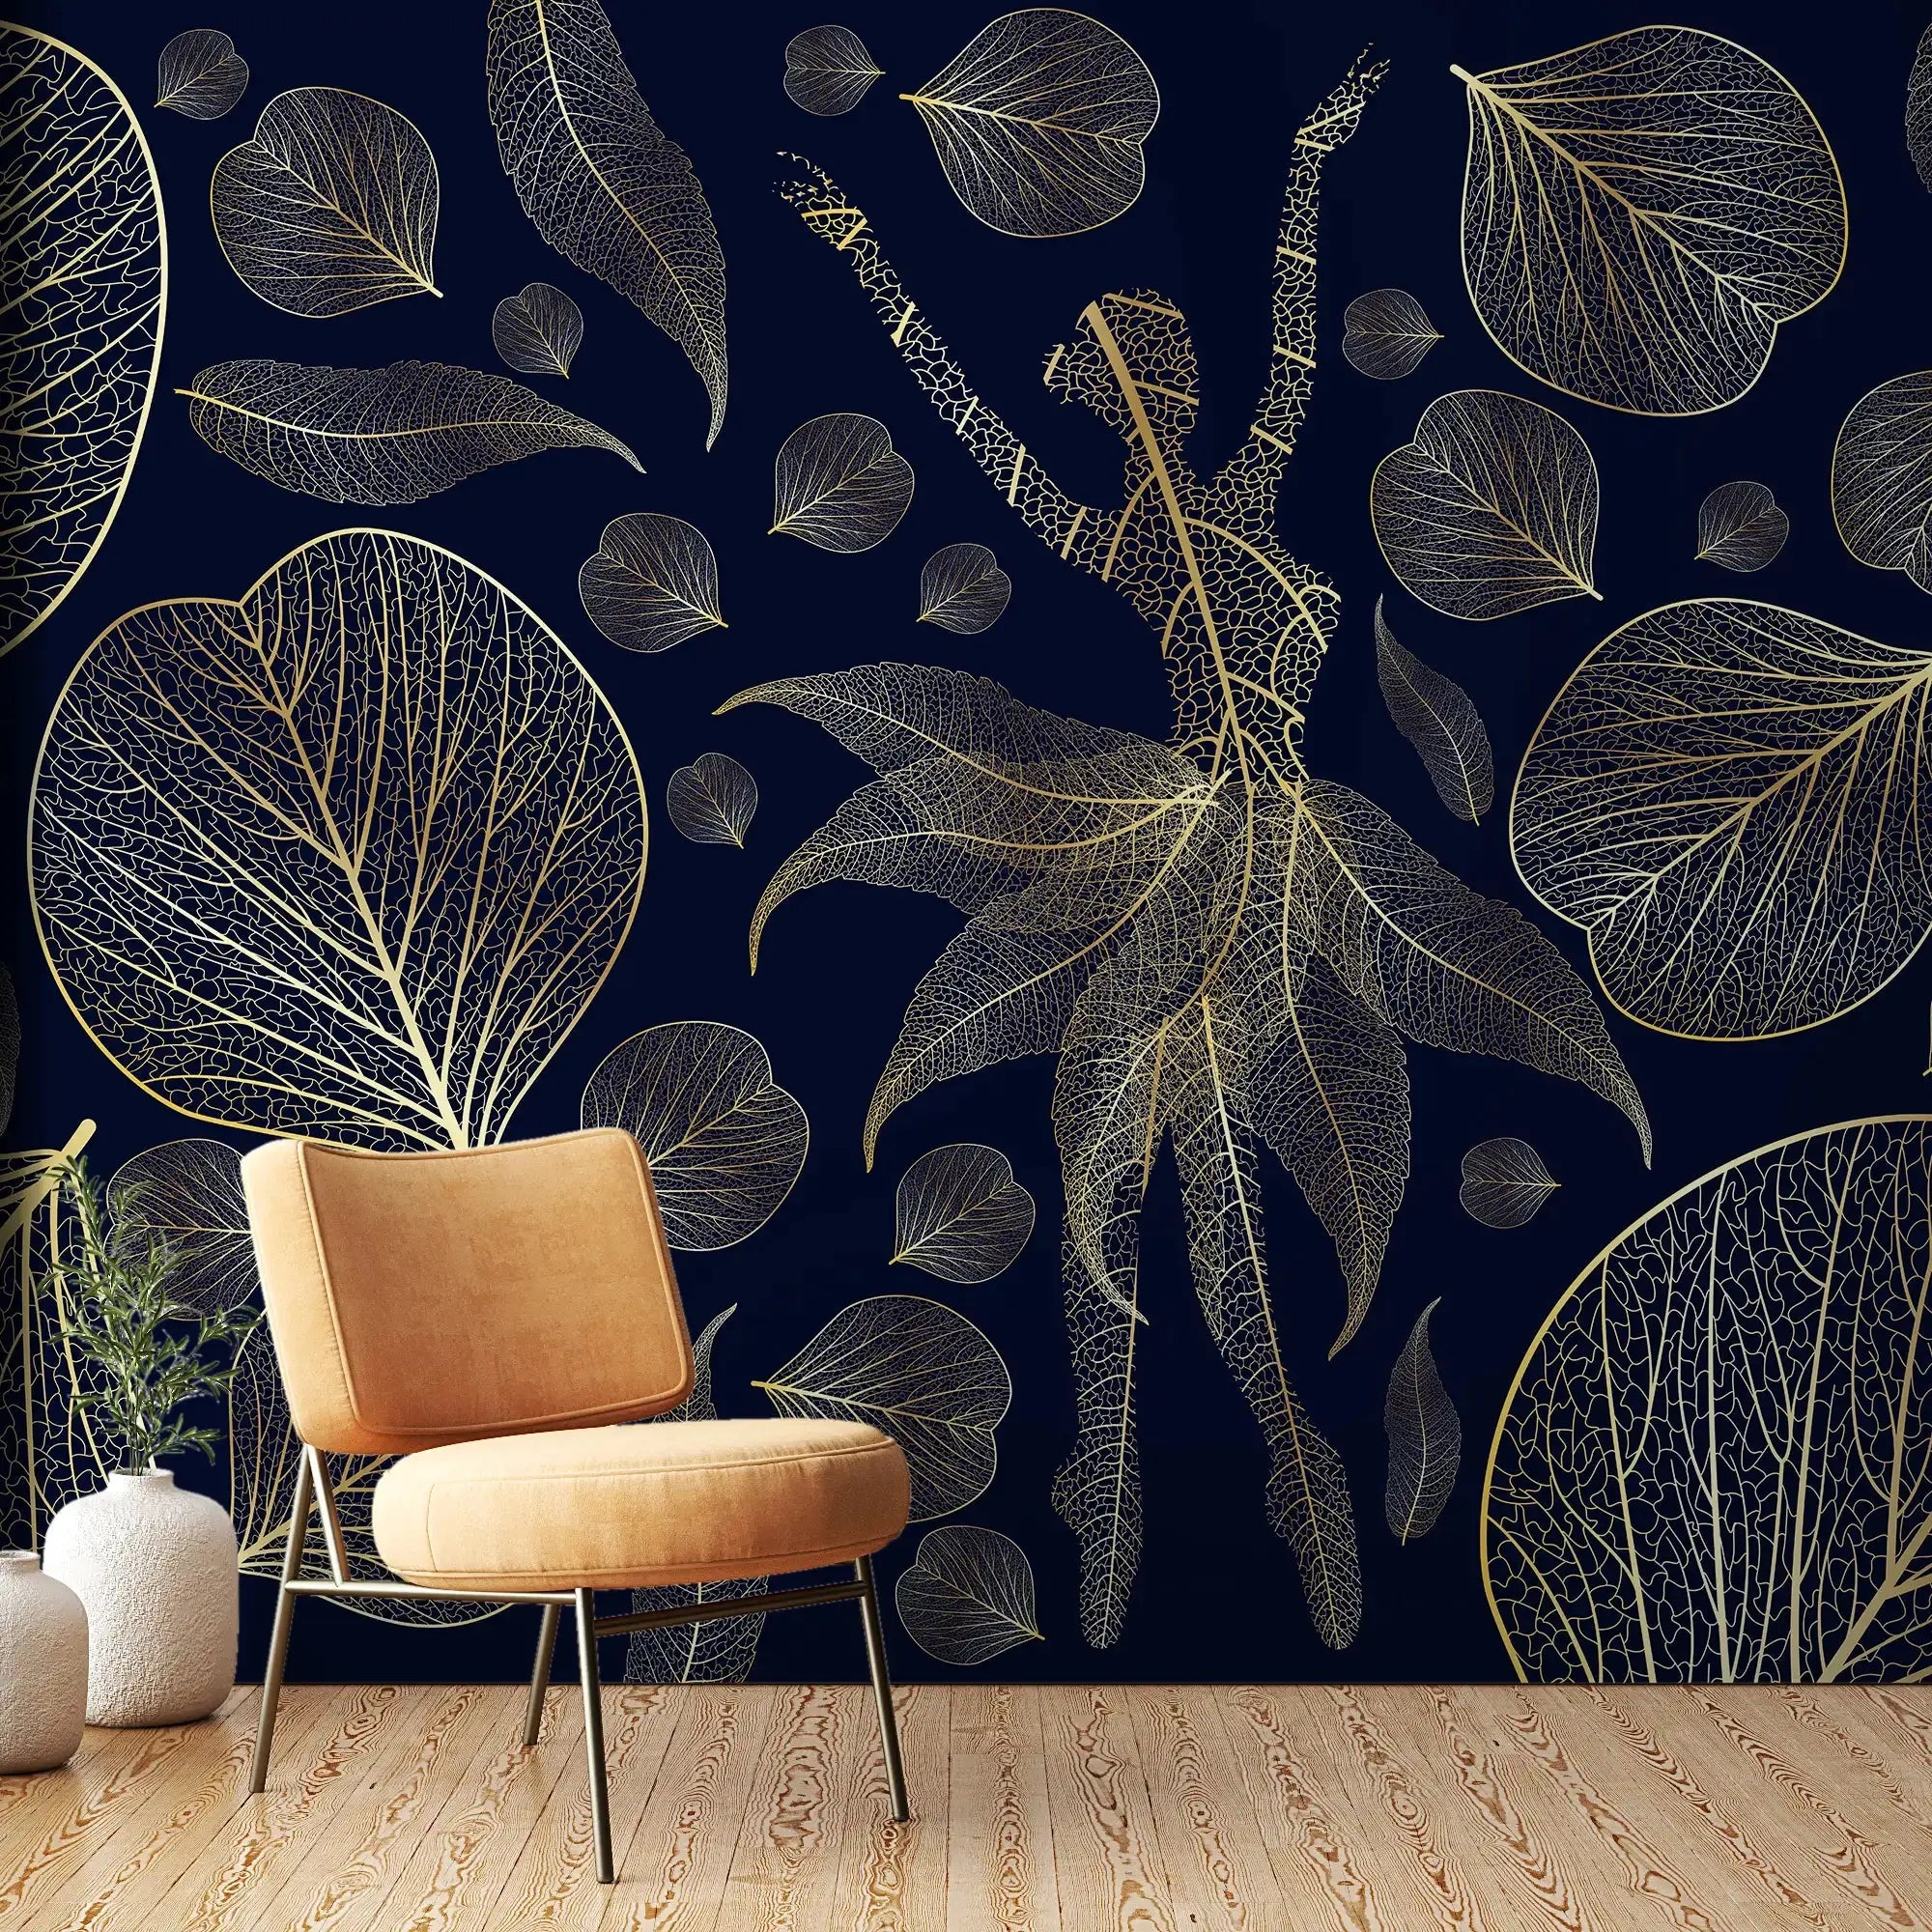 3108-A / Modern Floral Wallpaper: Gold Leaves and Flowing Patterns, Adhesive Peel and Stick for Stylish Wall Decor - Artevella